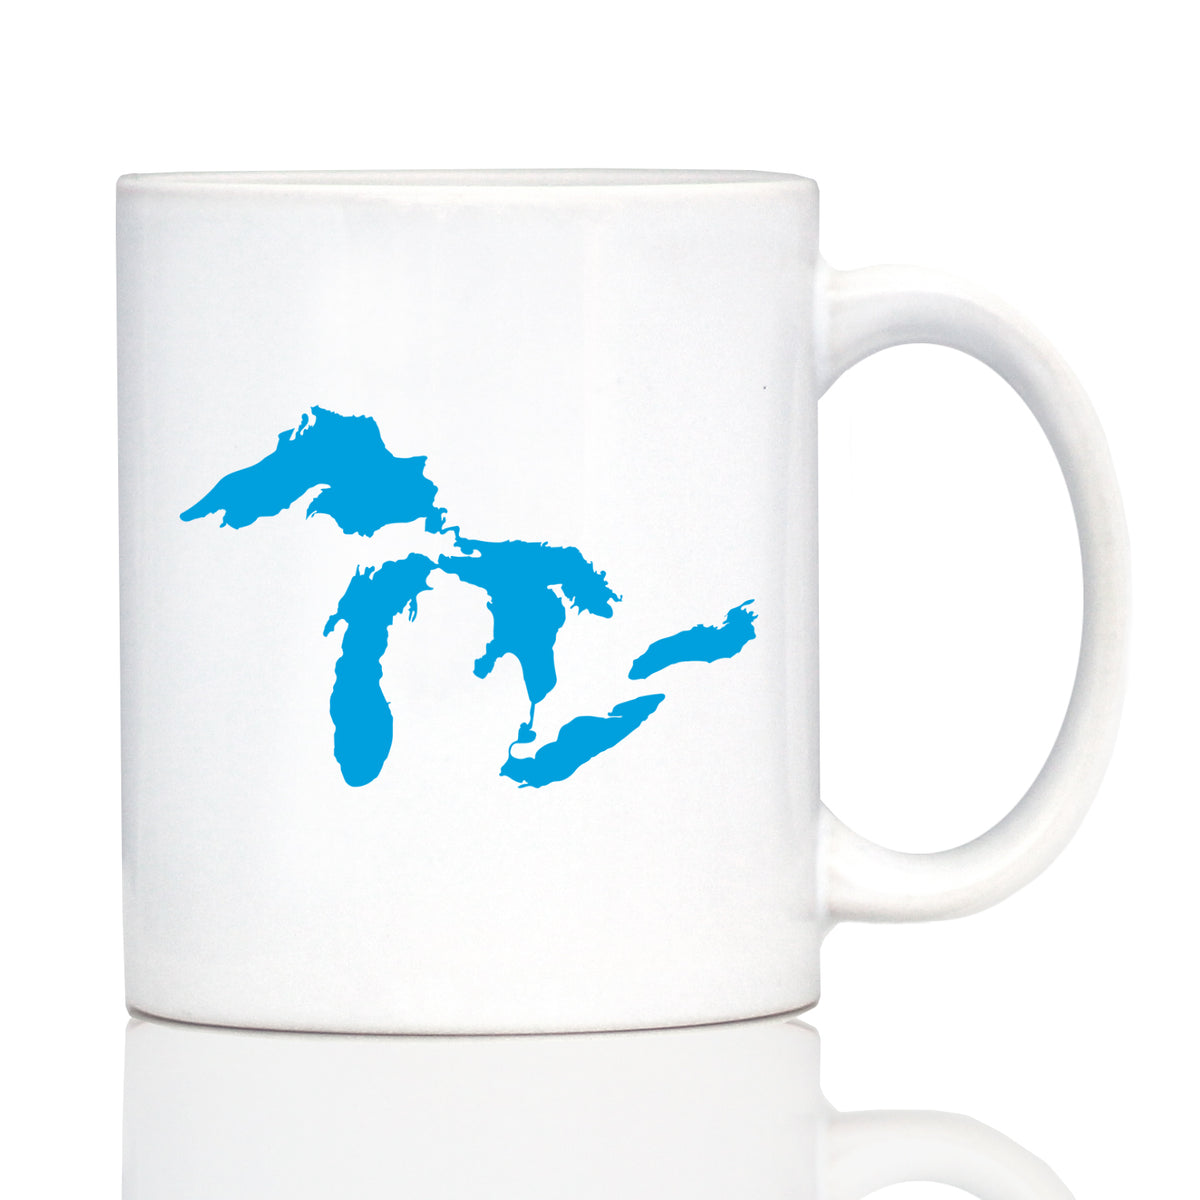 Great Lakes Map Coffee Mug - Unique Art Gifts for Midwestern Women &amp; Men